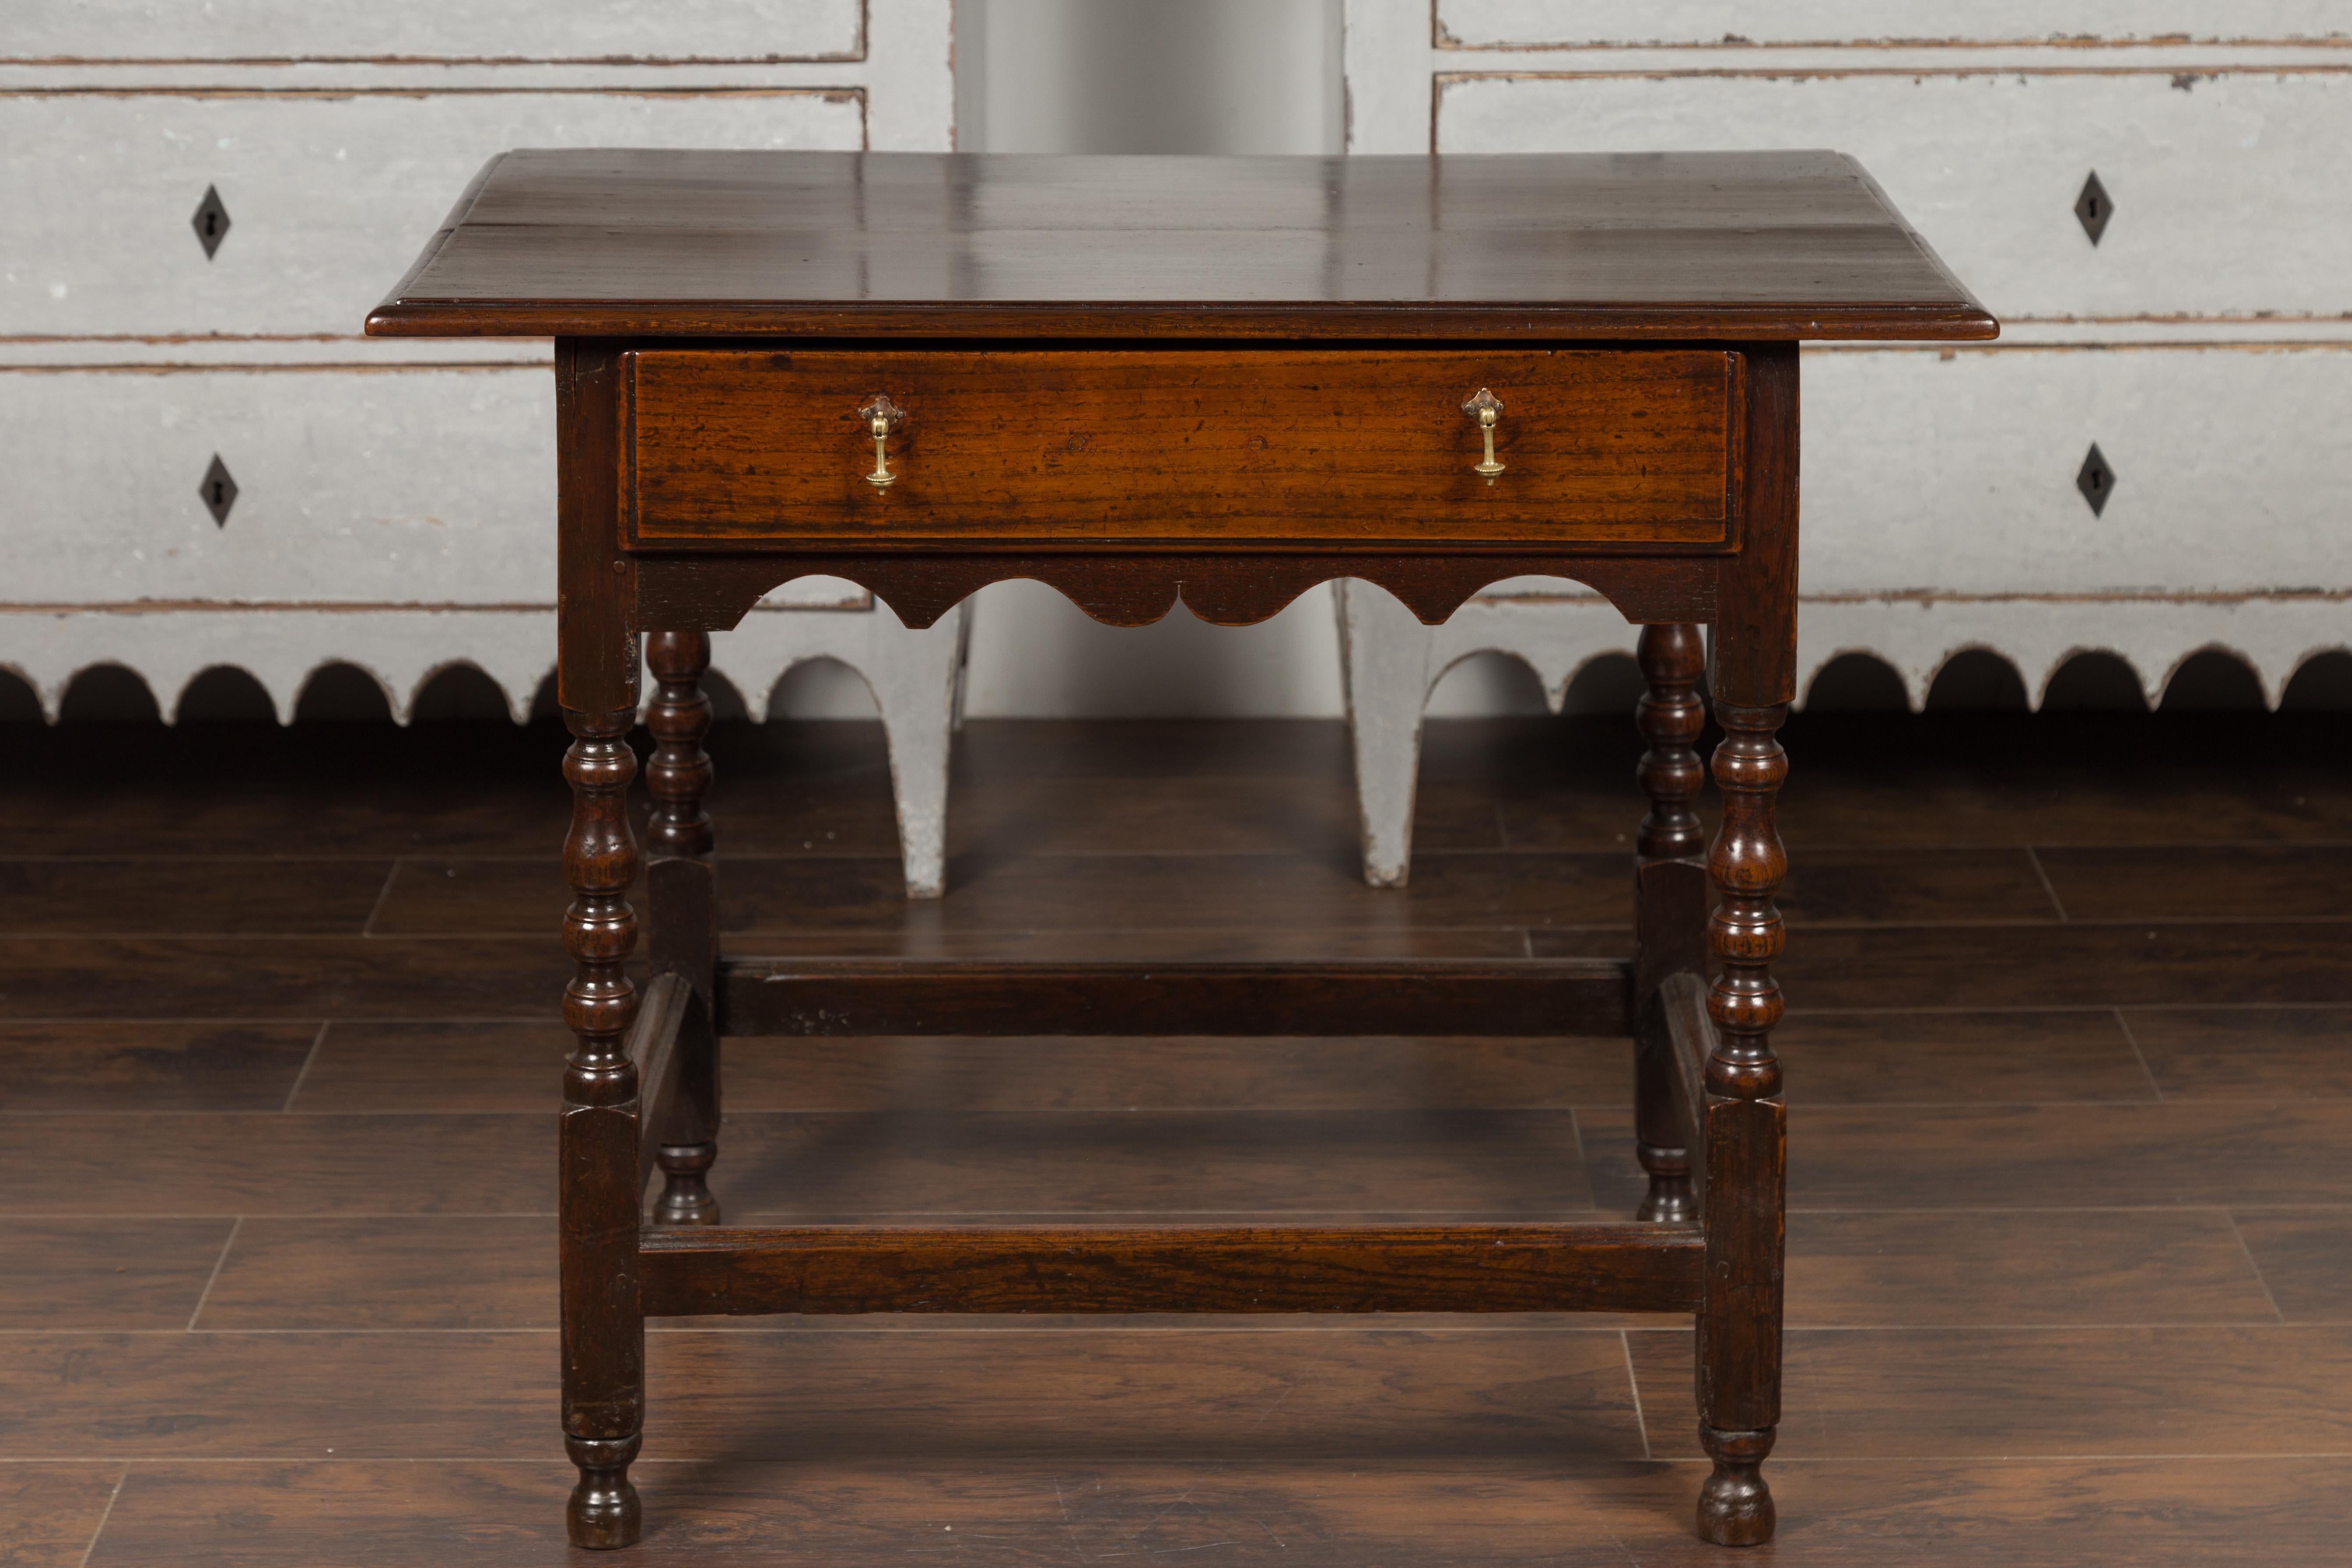 An English oak side table from the late 19th century, with single drawer, carved apron and turned legs. Crafted in England during the third quarter of the 19th century, this oak side table features a rectangular top with beveled edges, sitting above